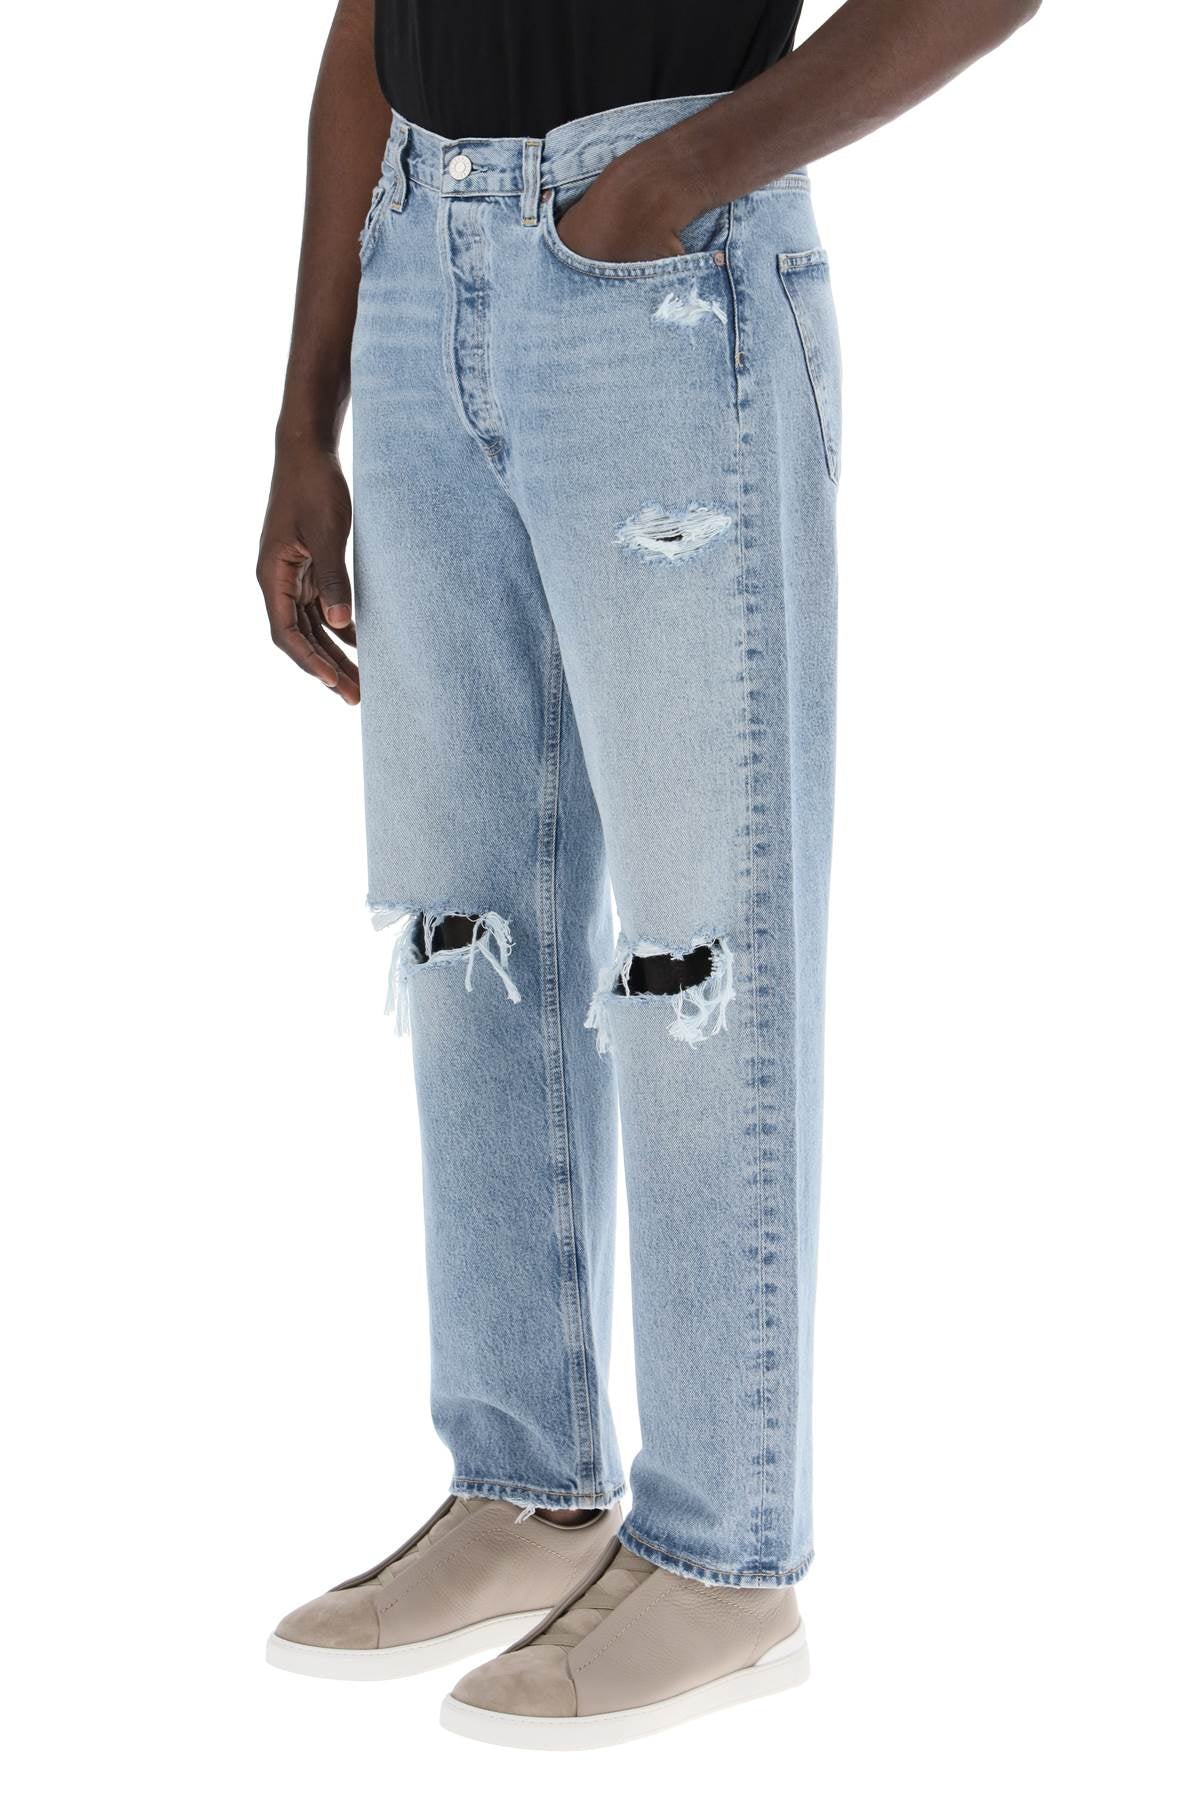 Agolde Agolde 90's destroyed jeans with distressed details